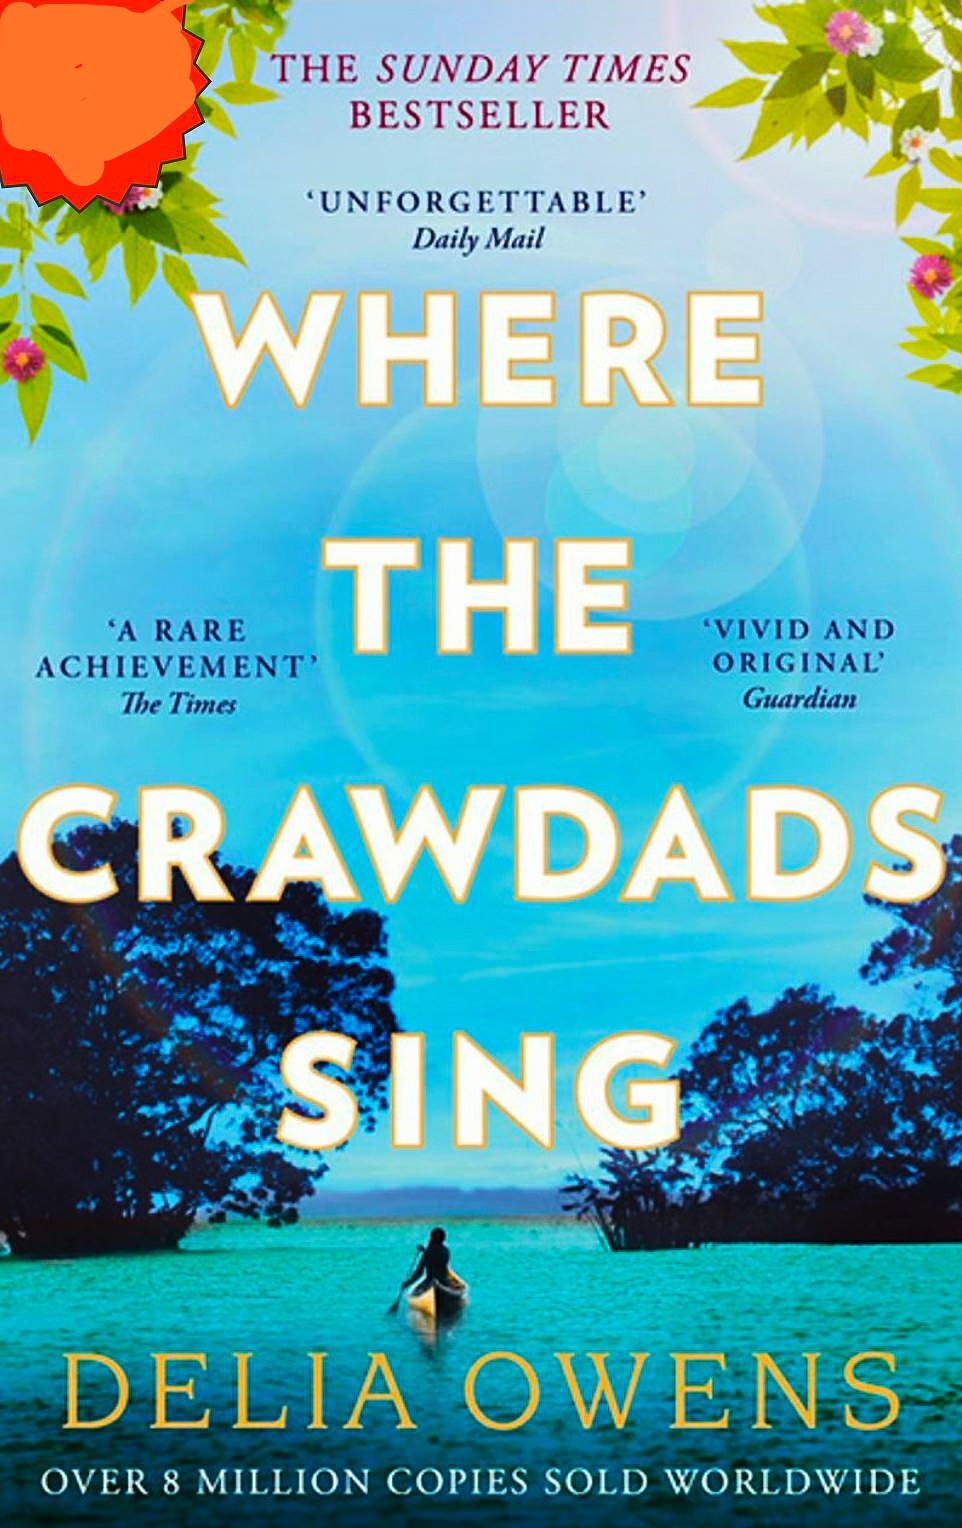 summary of the book where the crawdads sing